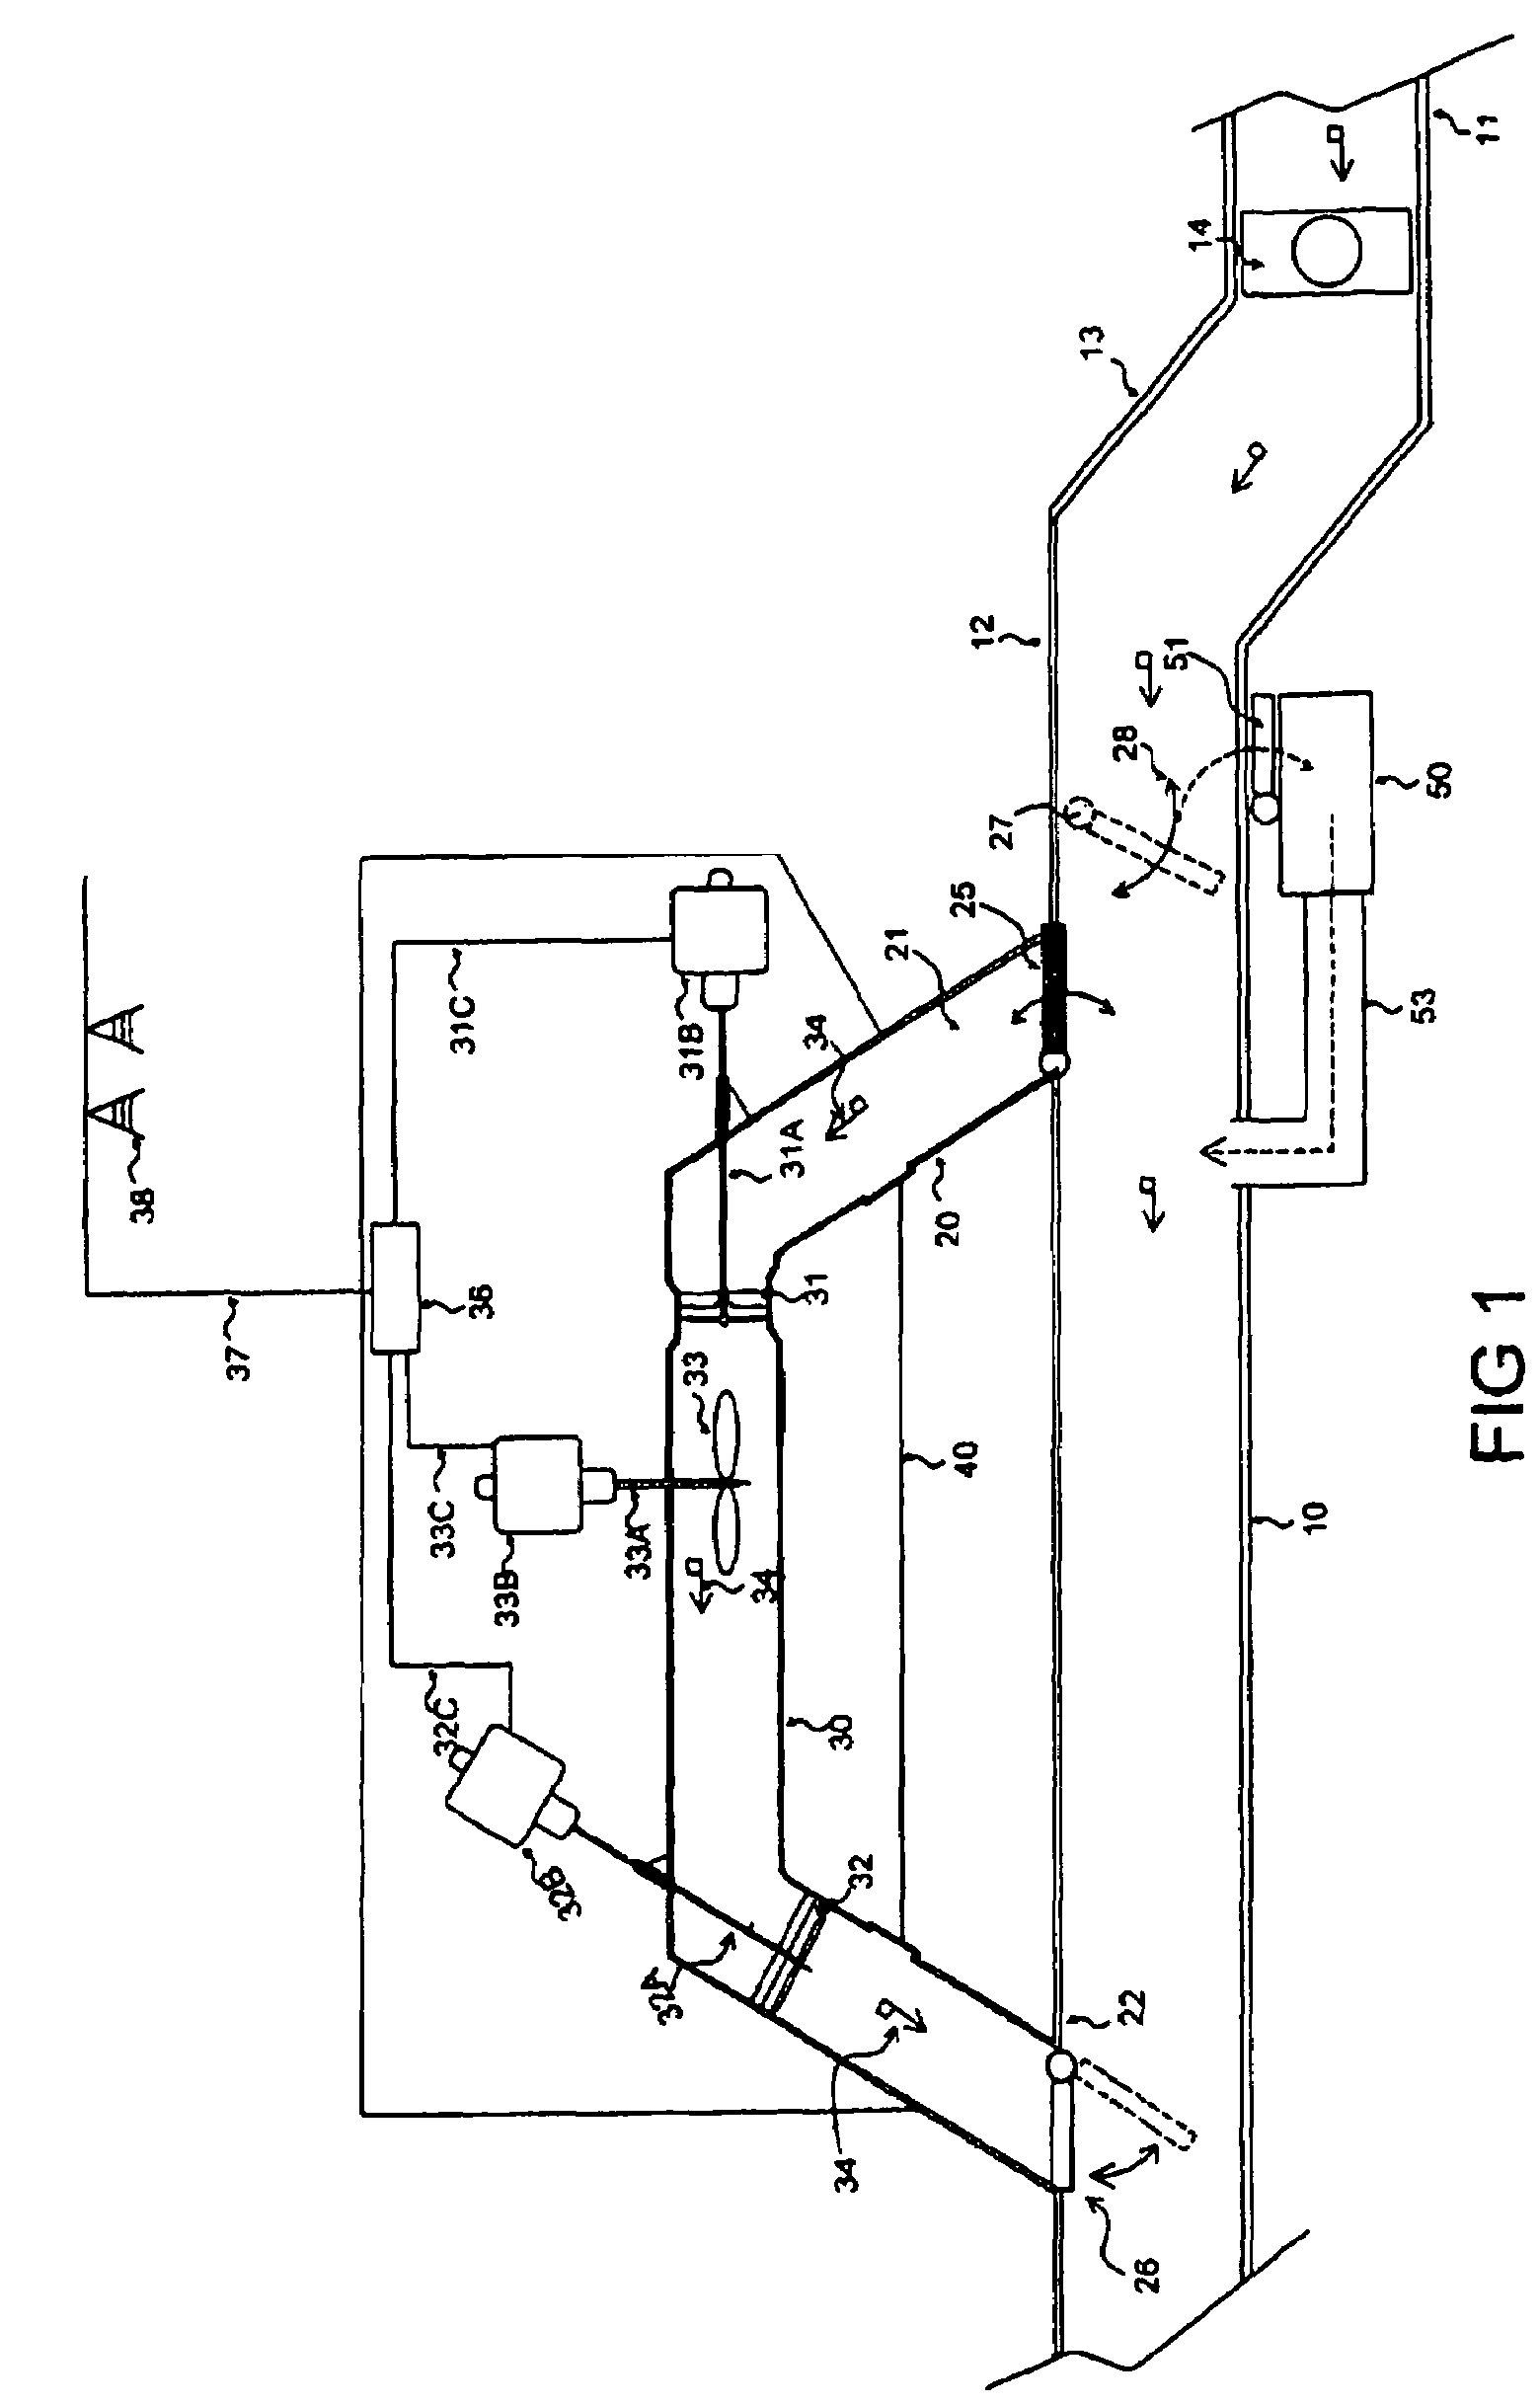 Waste water electrical power generating system with storage system and methods for use therewith